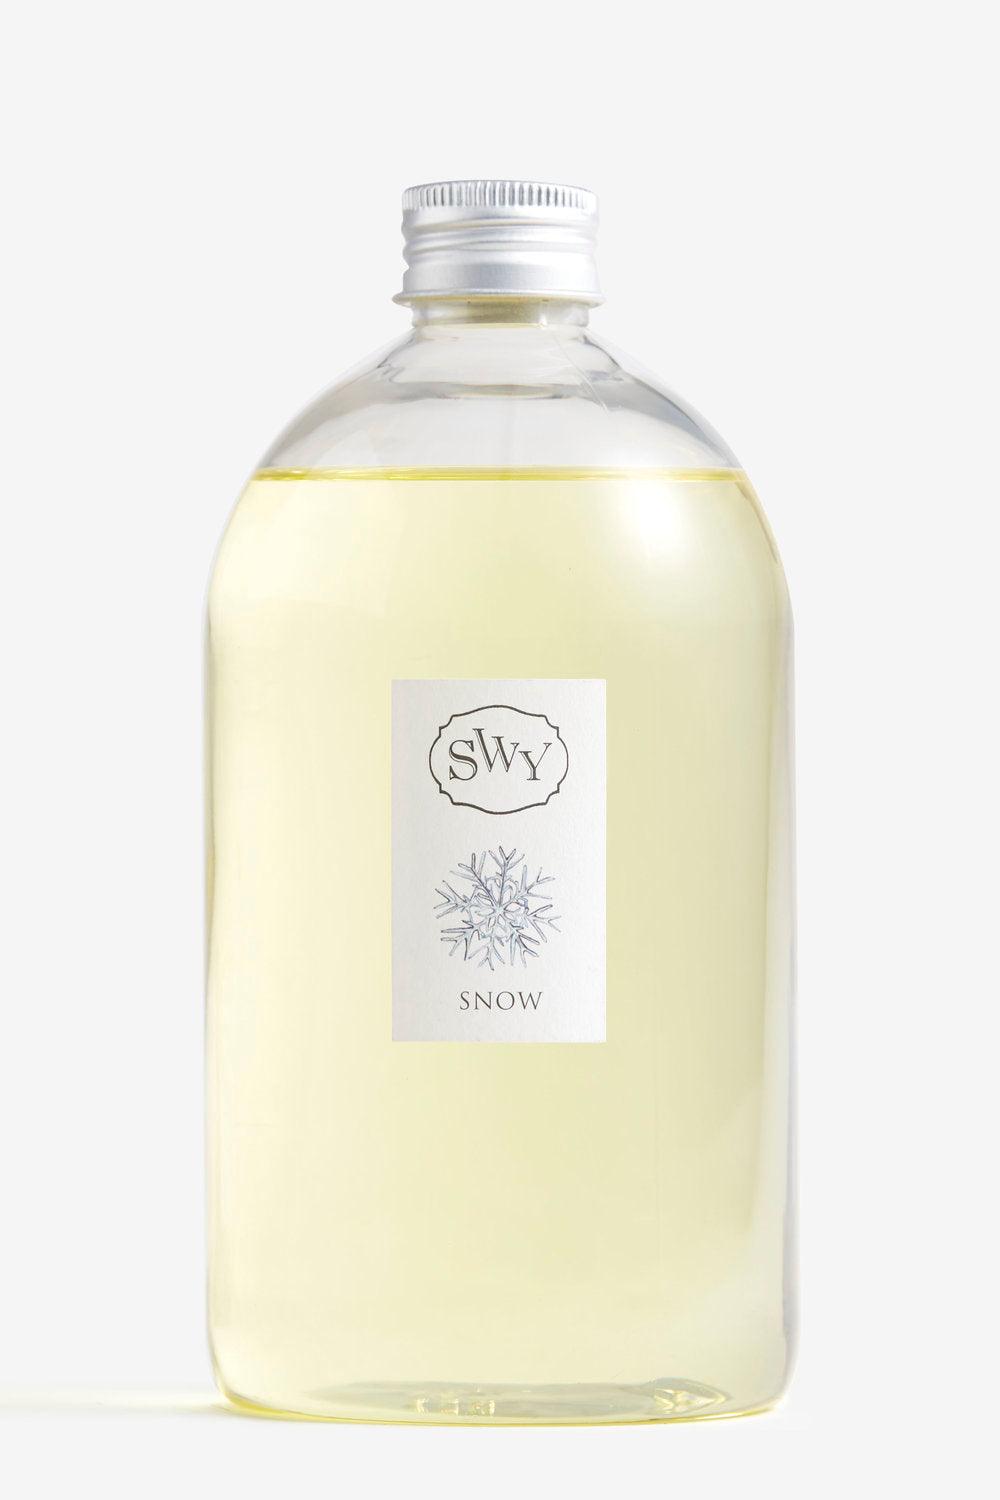 Reeds Diffuser – Snow - SWY - Scent With You